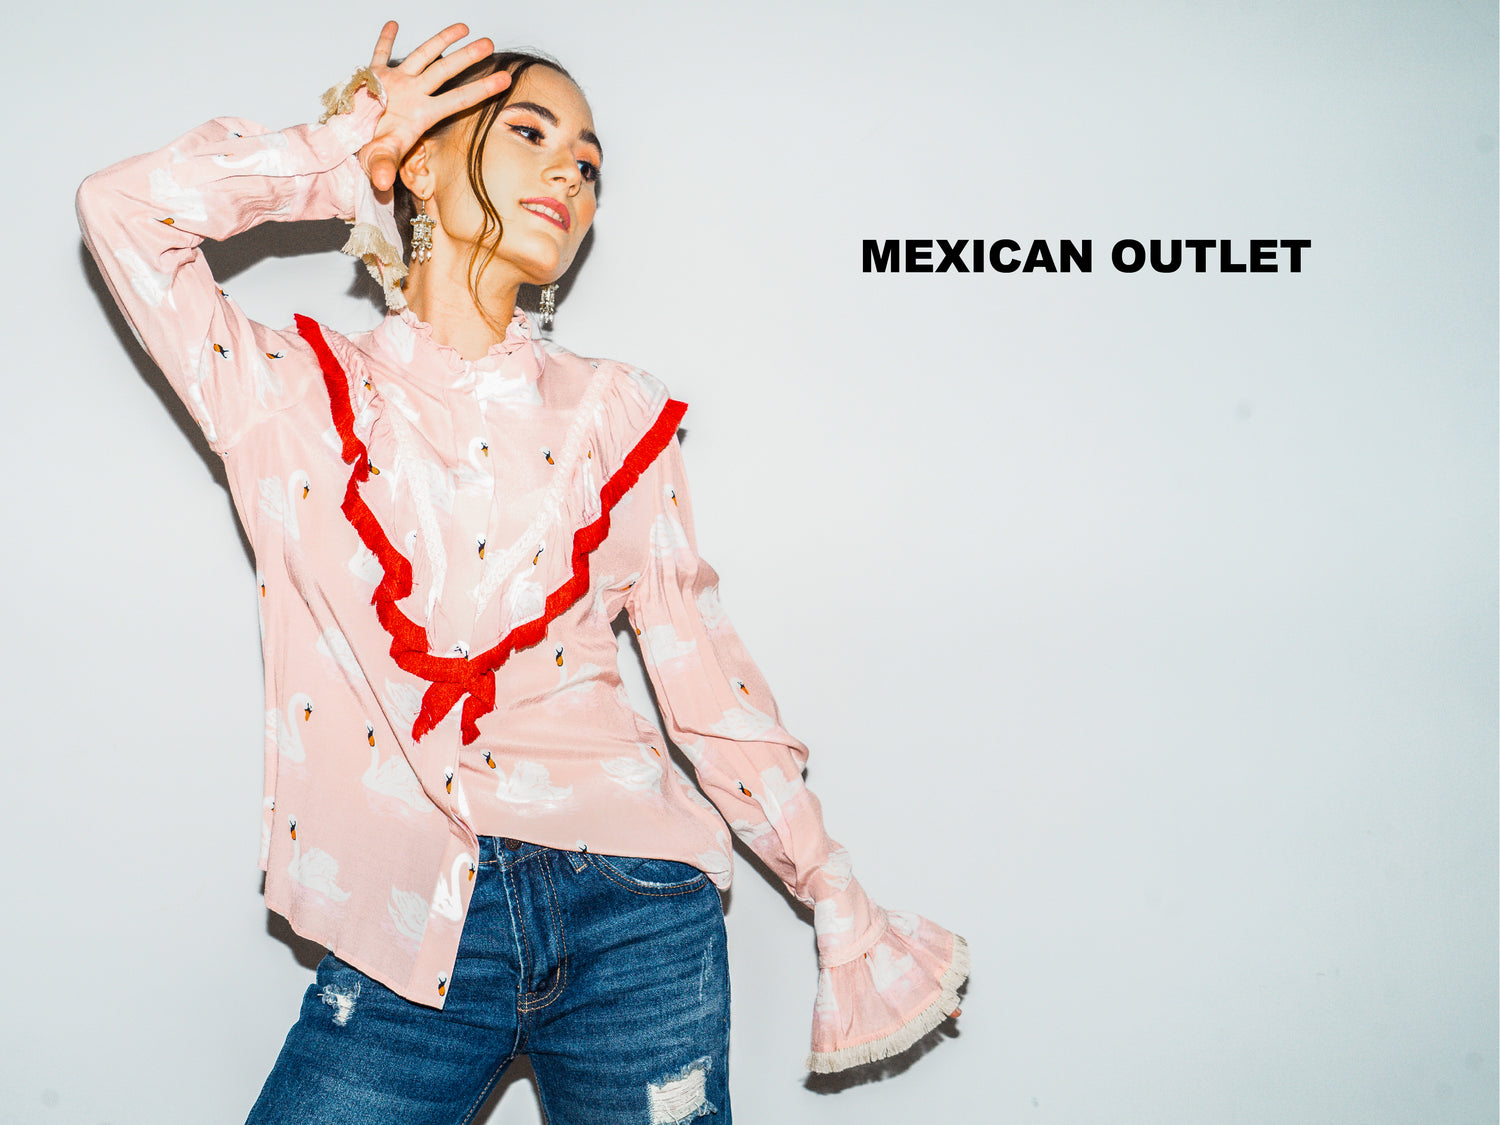 Mexican Outlet